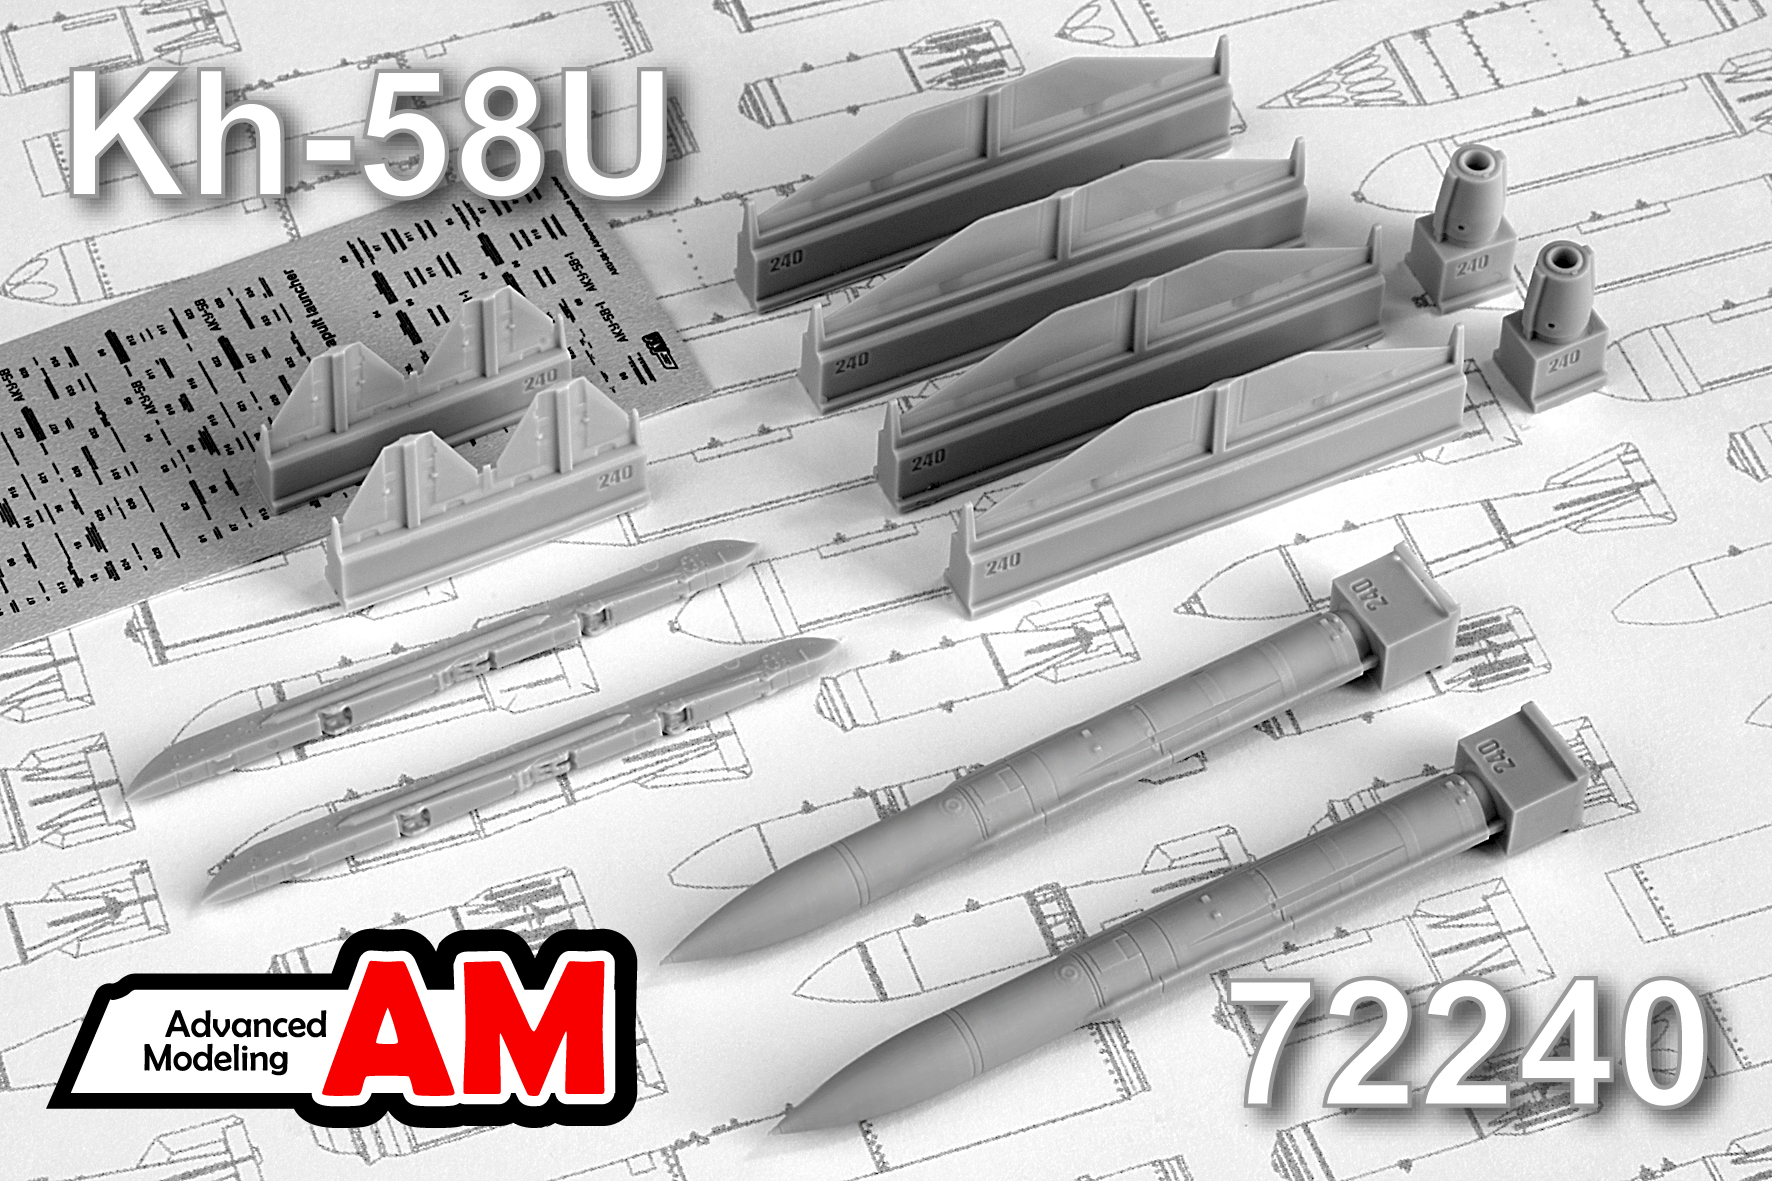 Additions (3D resin printing) 1/72 Aircraft guided missile Kh-58U with launcher AKU-58 (Advanced Modeling) 